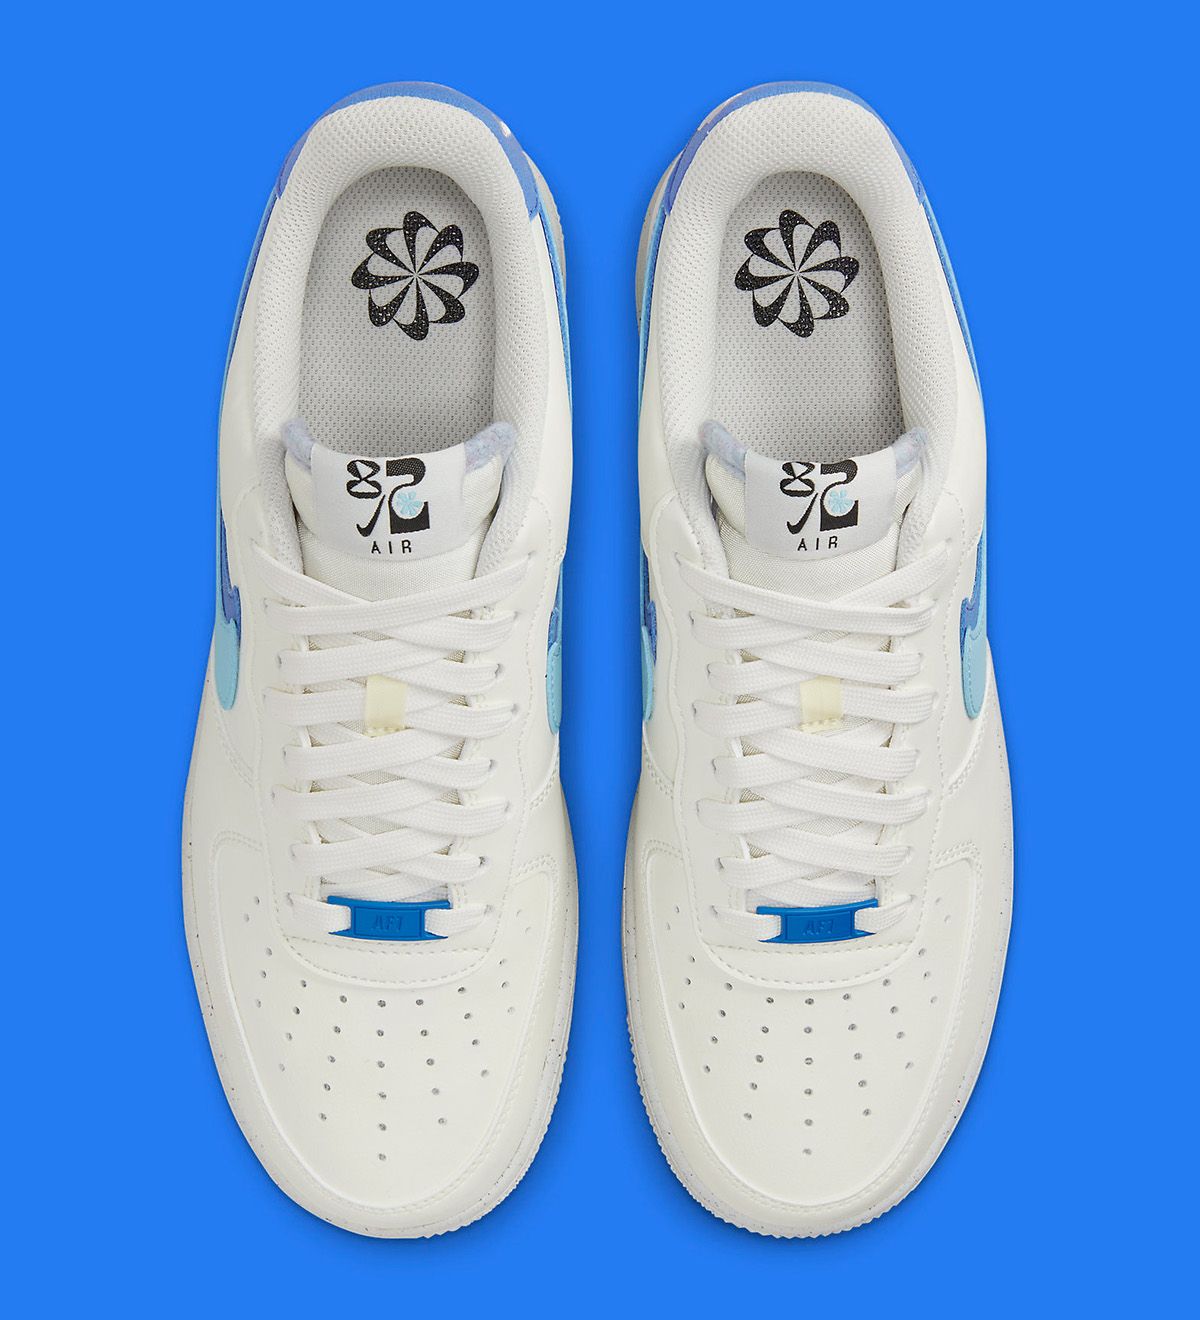 Official Images // Nike Air Force 1 Low "82" | HOUSE OF HEAT